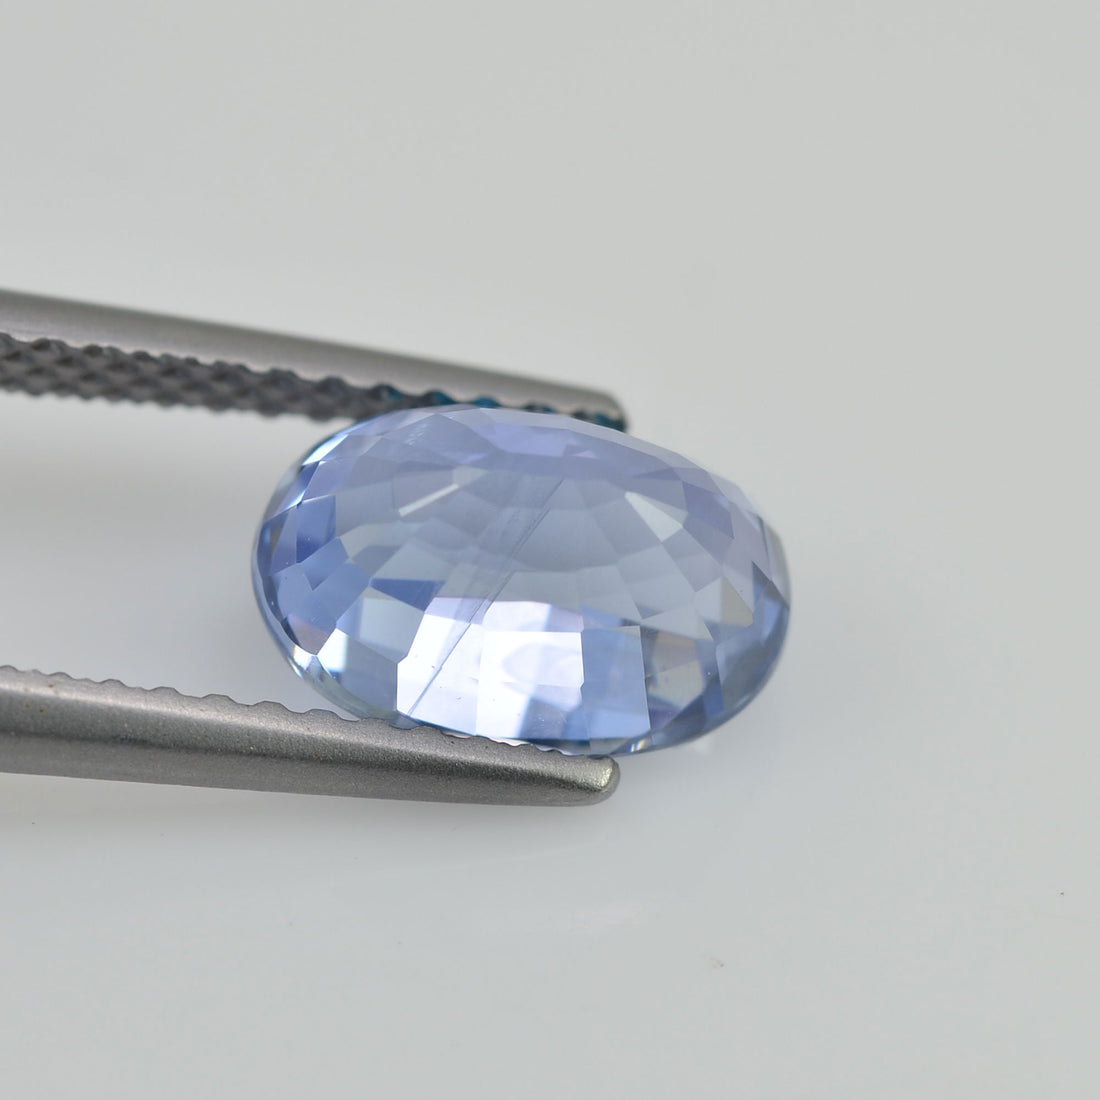 2.61 cts Unheated Natural Blue Sapphire Loose Gemstone Oval Cut Certified